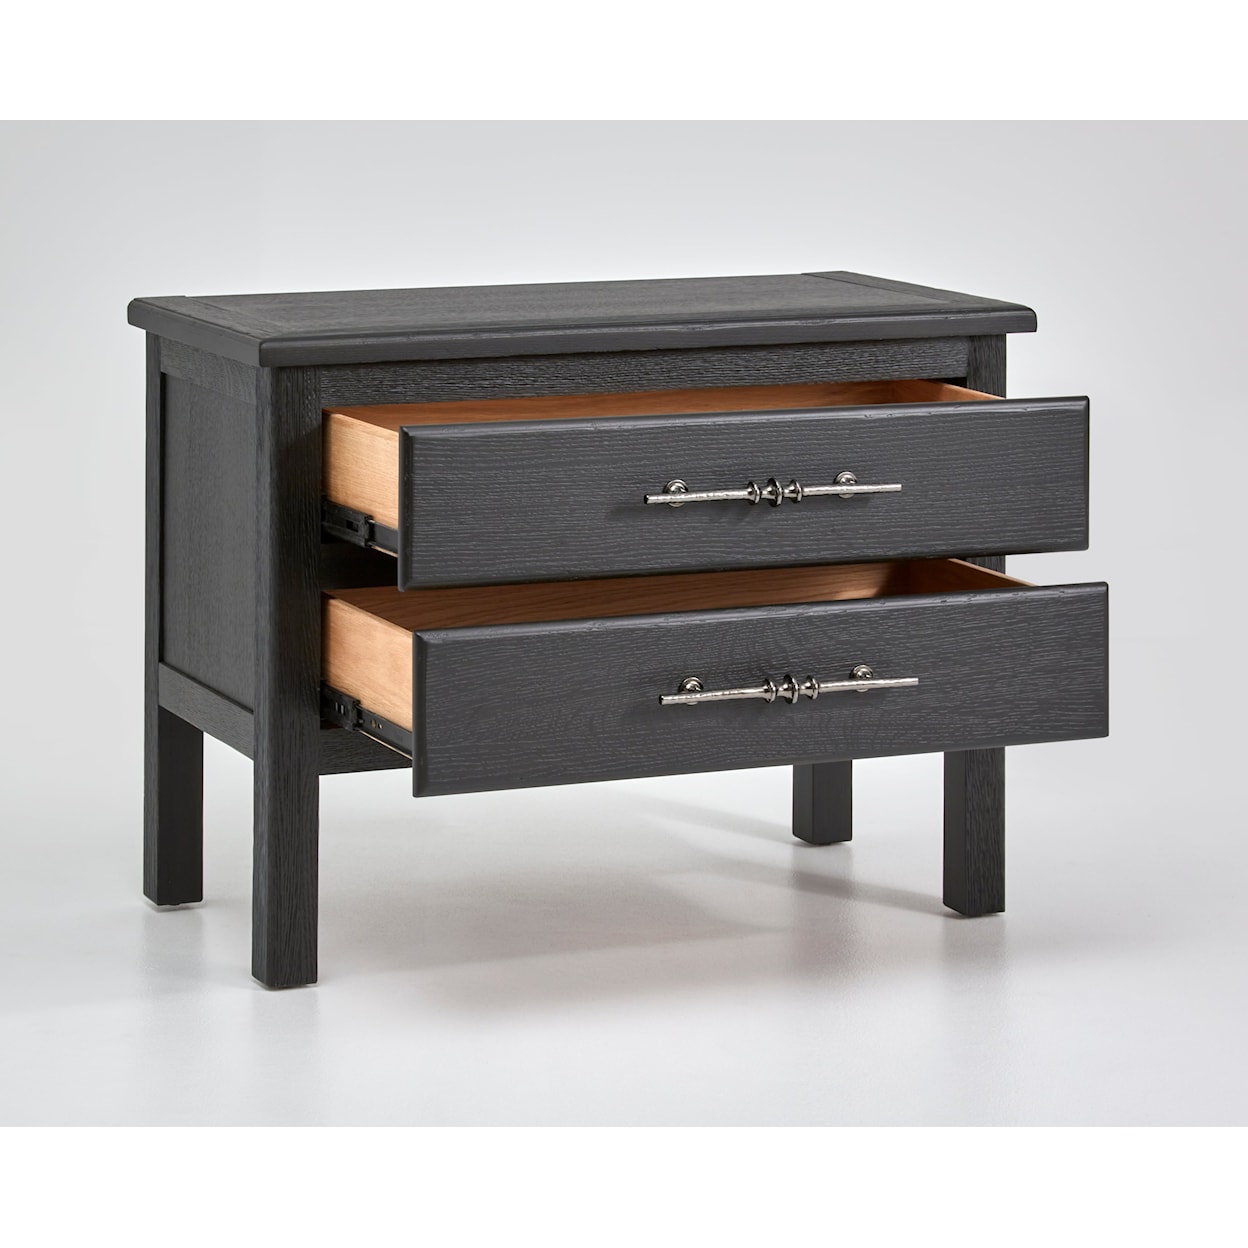 The Preserve Turner Accent Nightstand